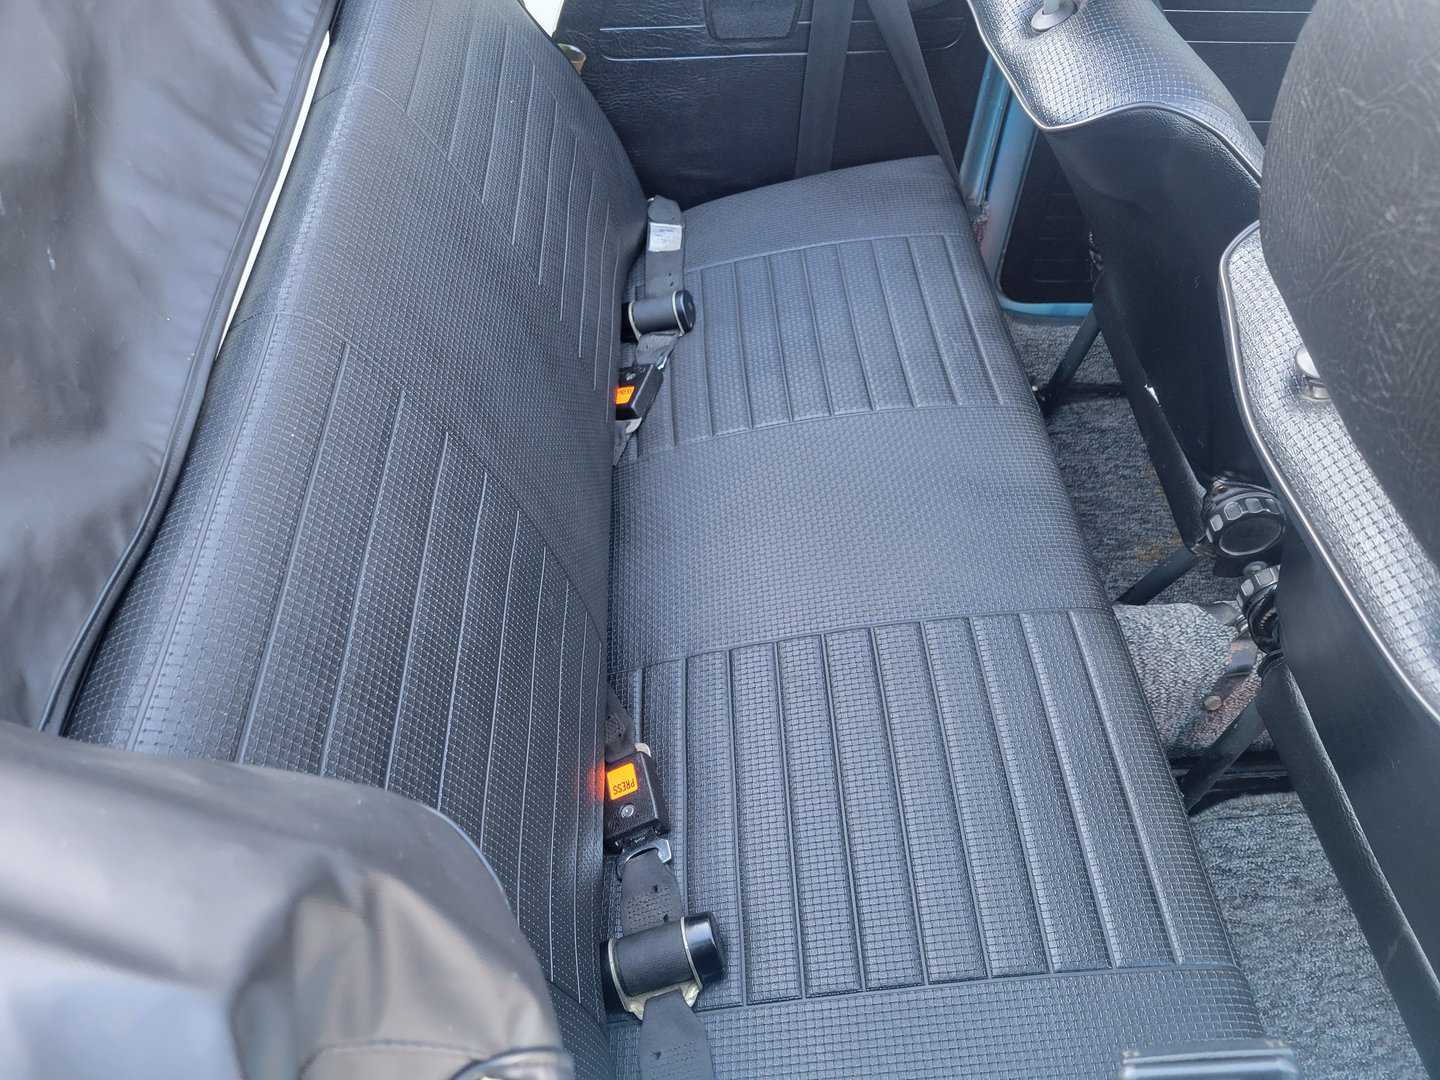 A 1979 Volkswagen Beetle Convertible featuring a secure back seat with a seat belt.